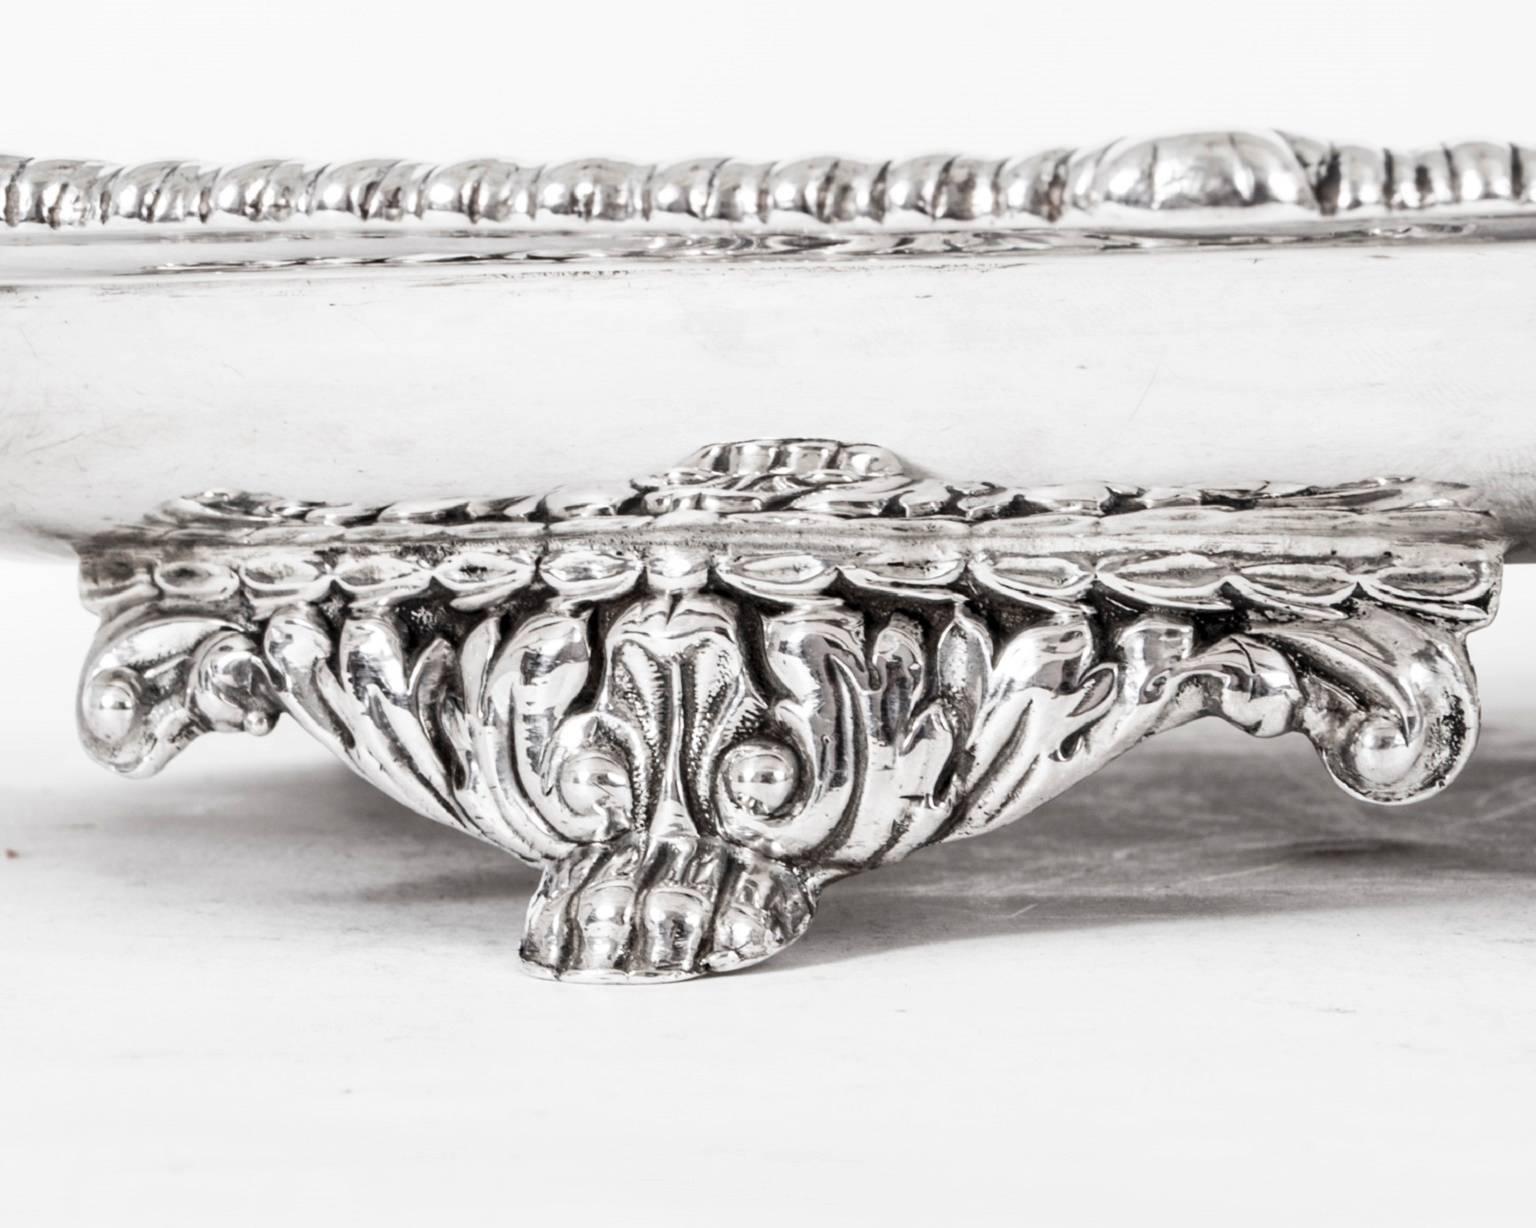 This is a wonderful English antique sterling silver tray, or serving dish, by the world famous silversmith Paul Storr.

It has really clear hallmarks for London 1826 and the makers mark of Paul Storr.

It is typical of his work with the